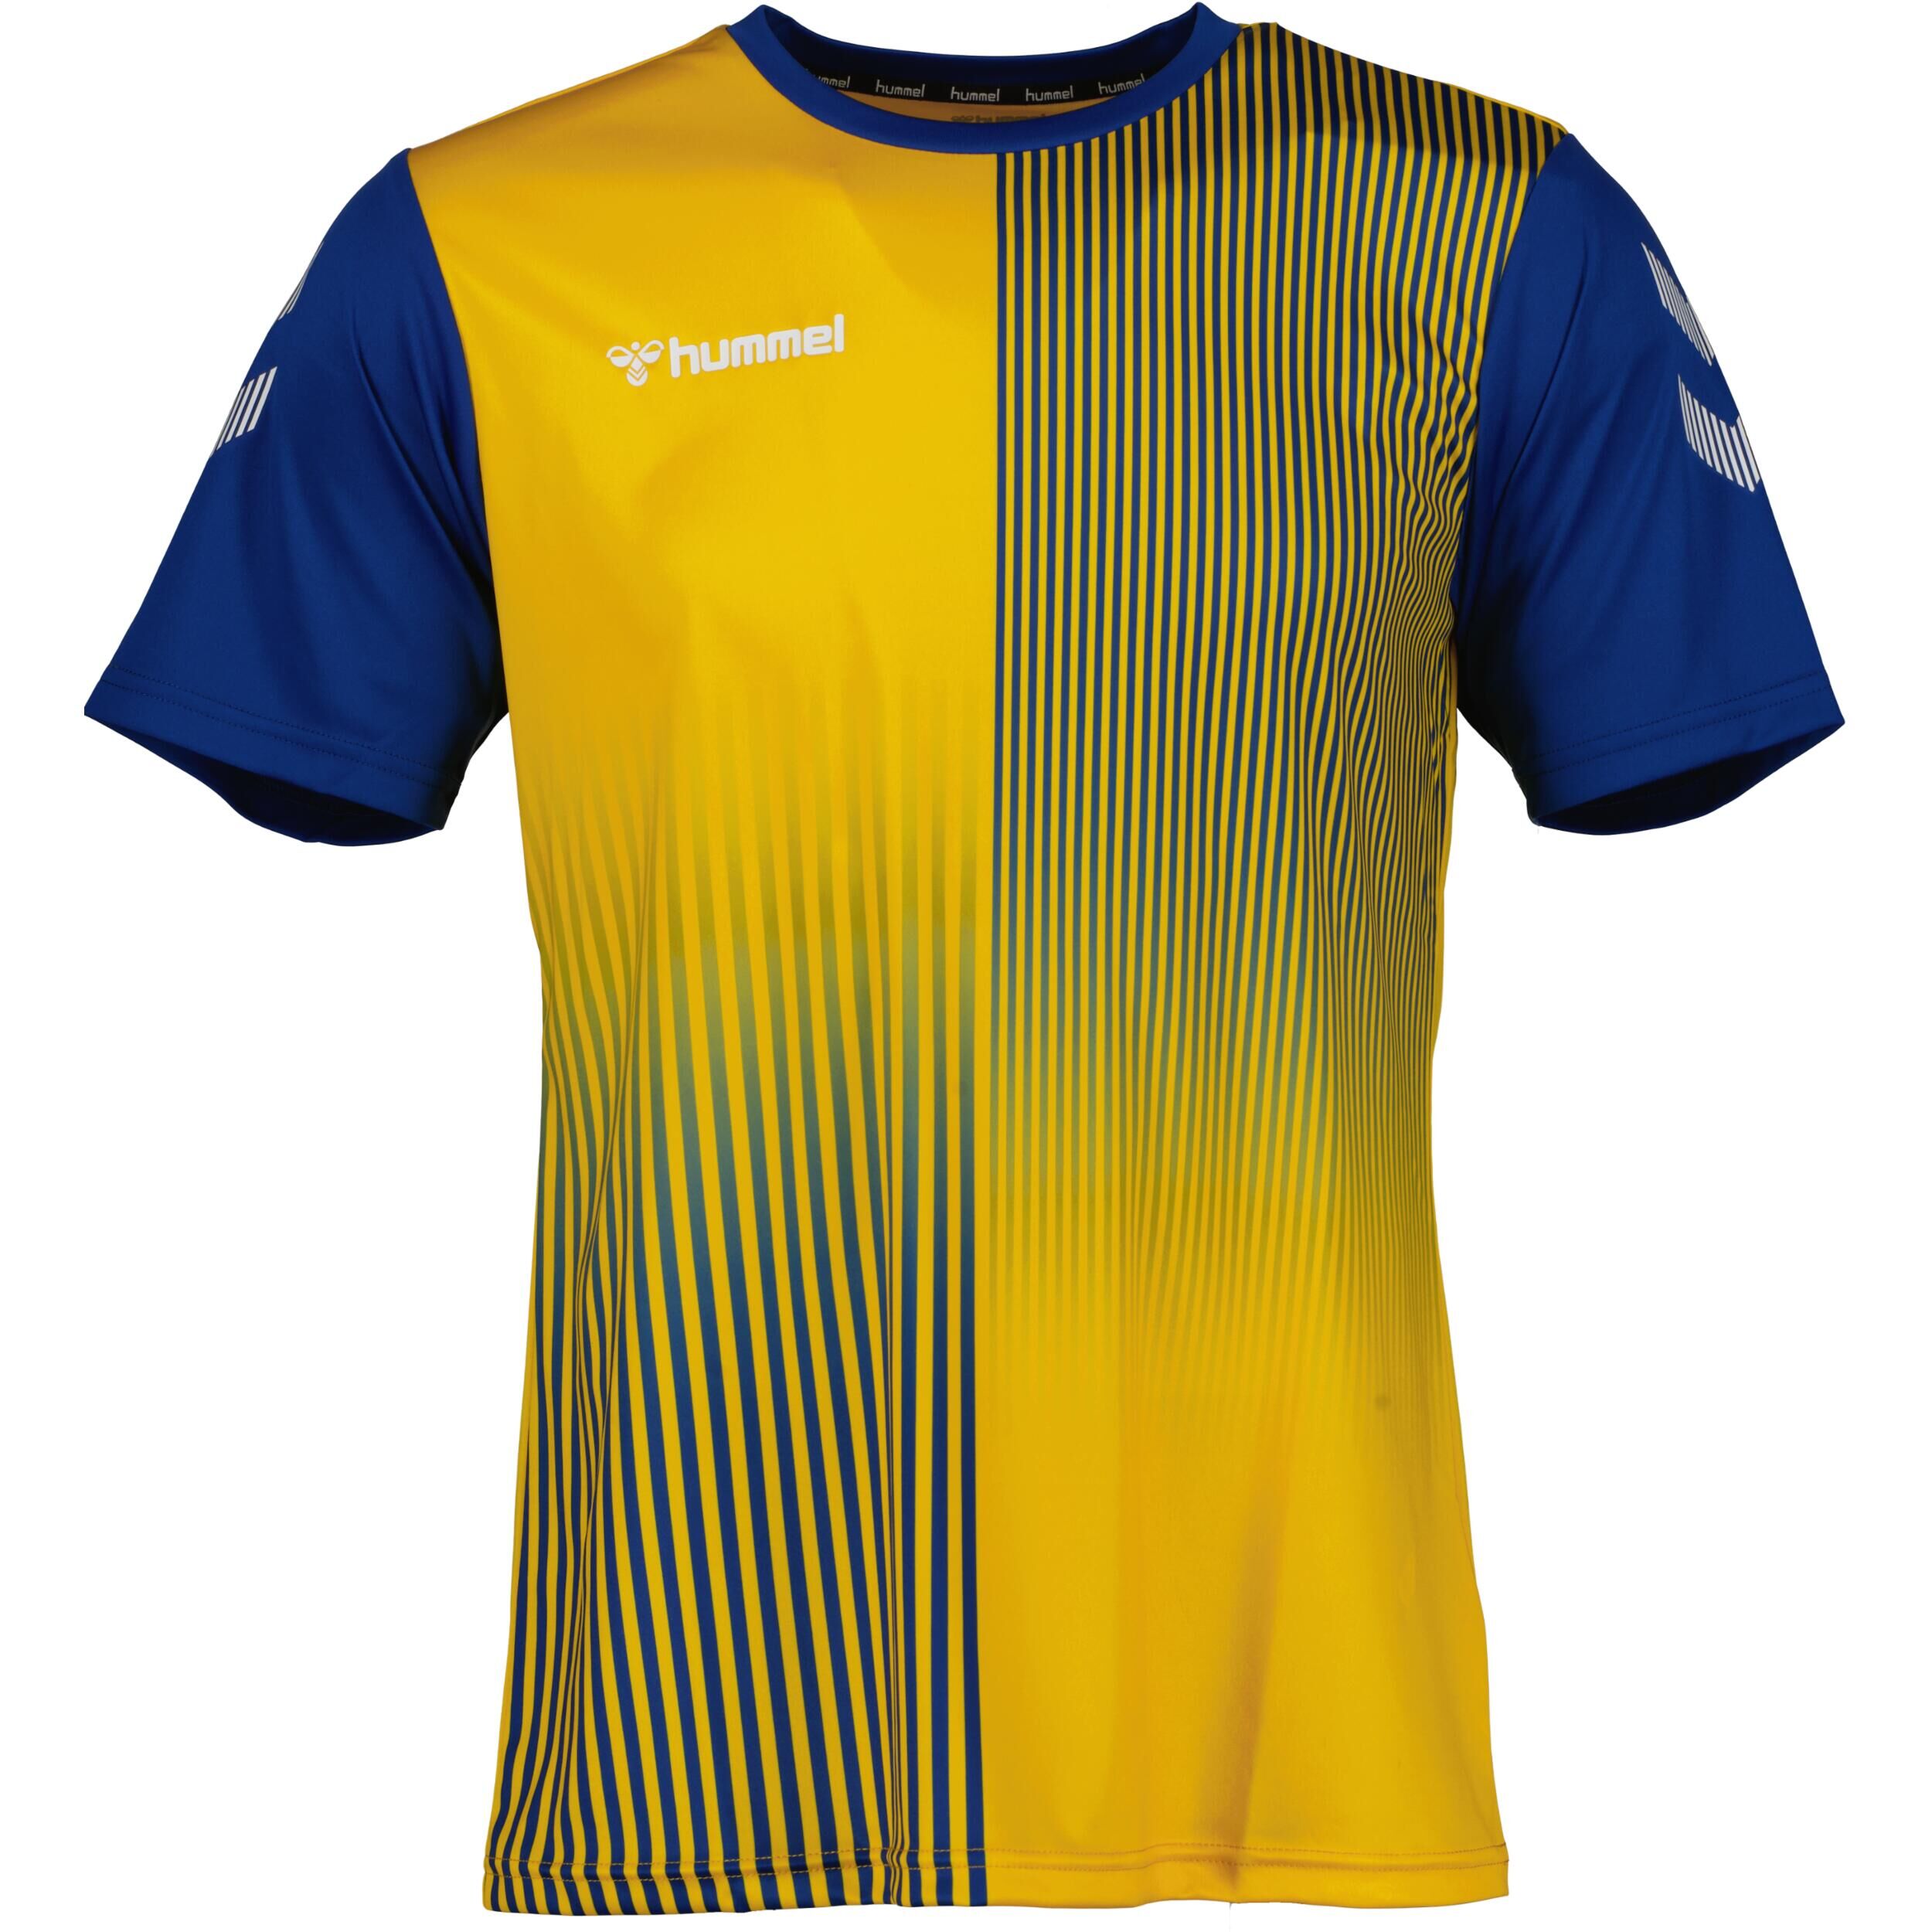 HUMMEL Mexico jersey for kids, great for football, in true blue/sports yellow